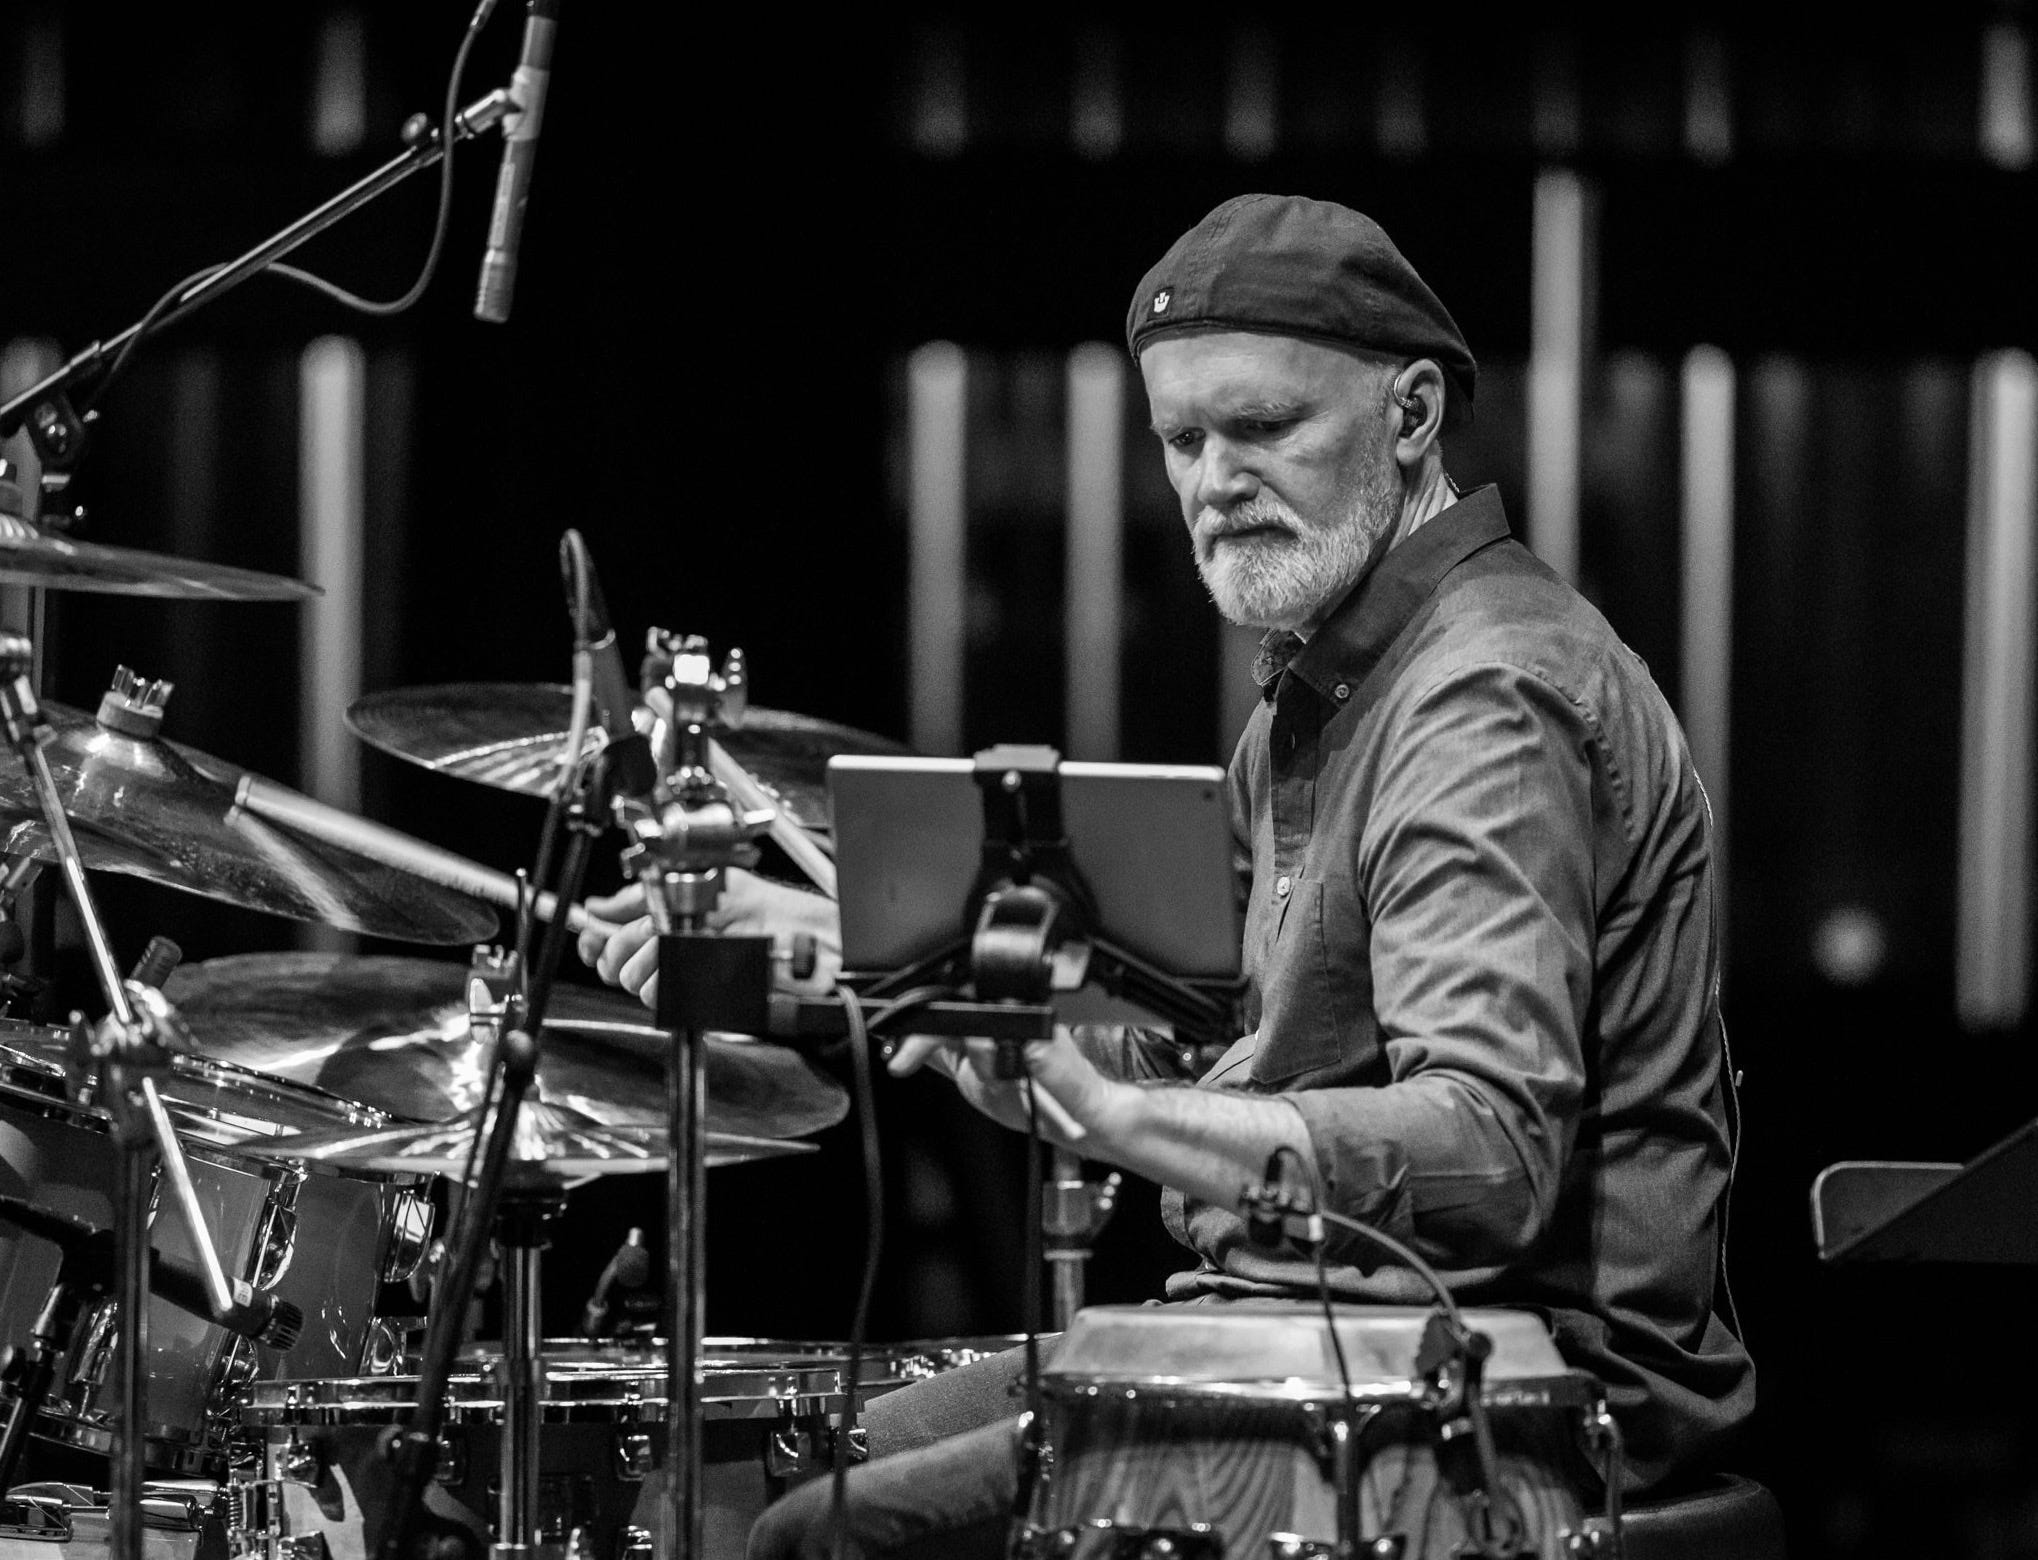 Scott Laningham played drums with local groups Church on Monday and Tres Musicos, and he toured with Christopher Cross and Alejandro Escovedo.